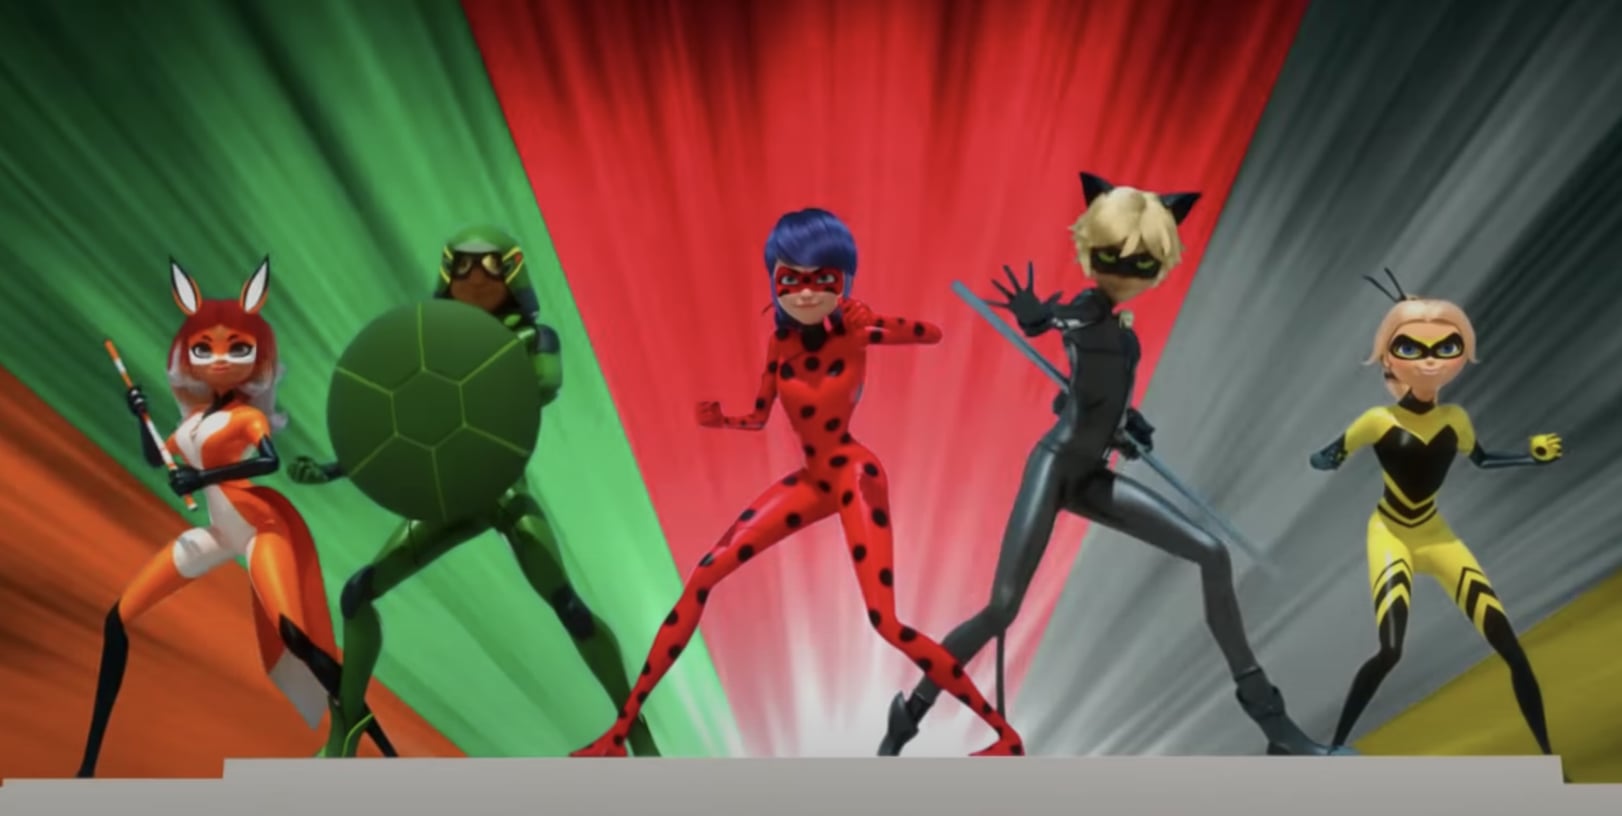 Why the Animated Superhero Show Miraculous Is Great For Kids